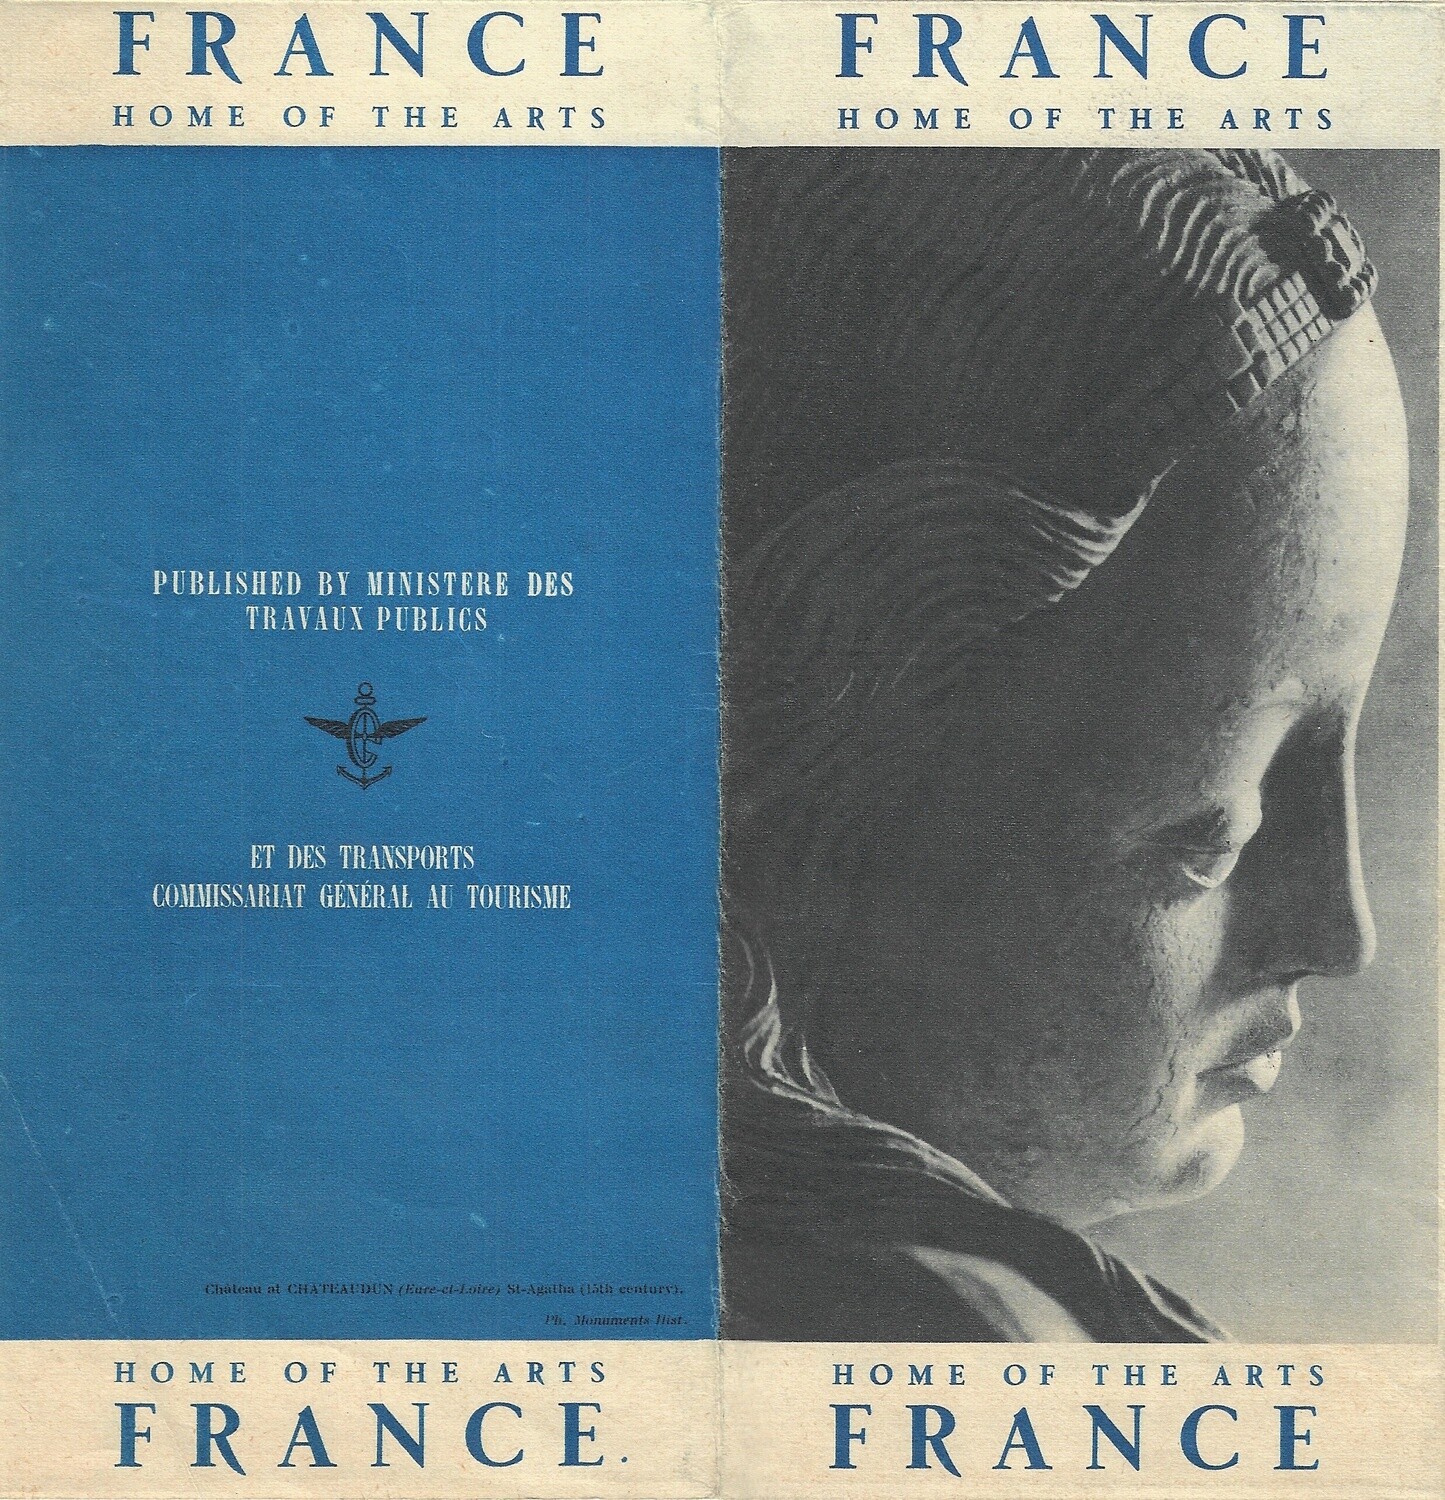 1950 Post-War French Art Guide